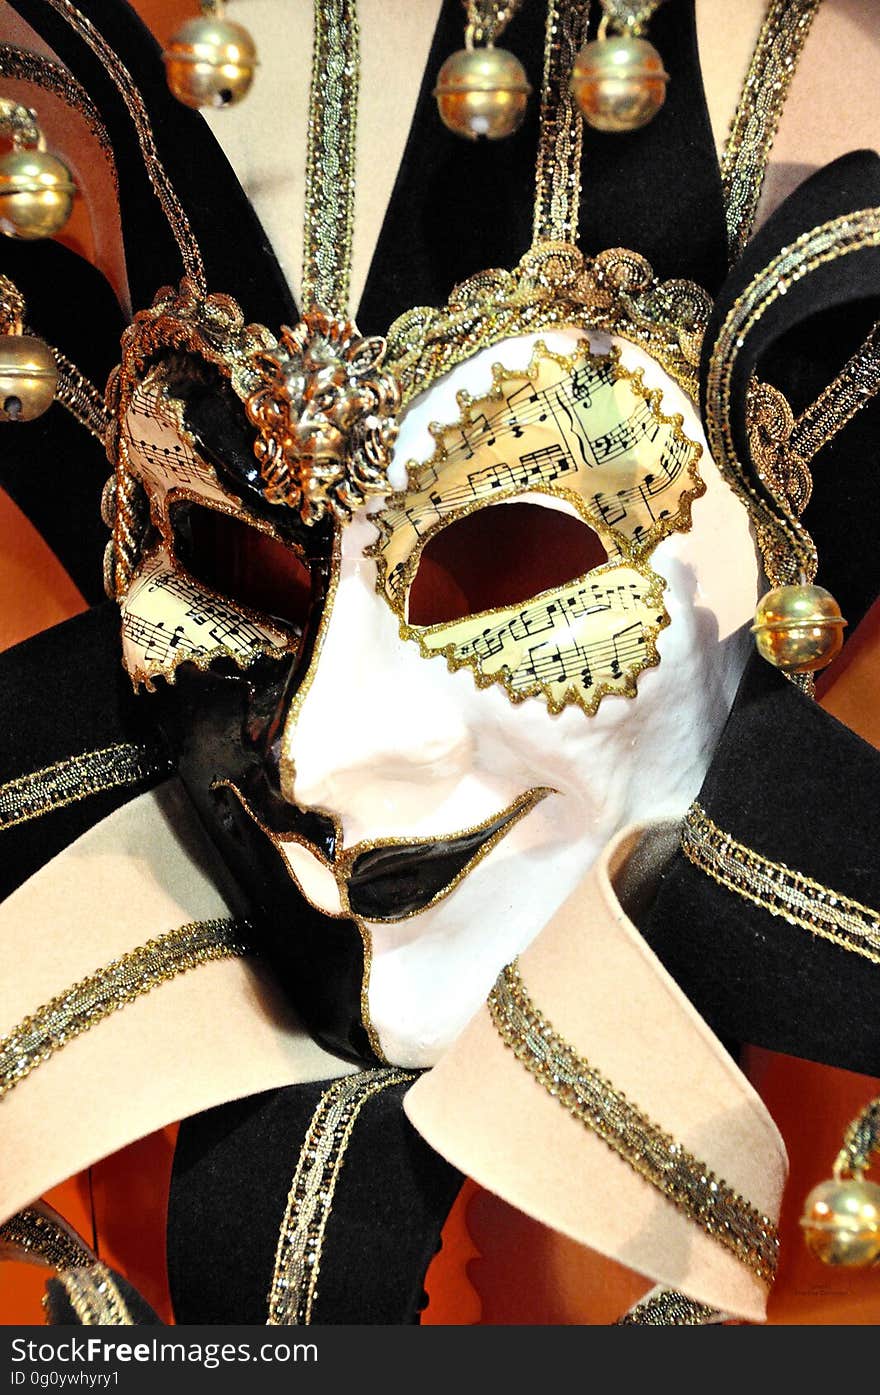 Venetian masks are a centuries-old tradition of Venice. The masks are typically worn during the Carnival of Venice, but have been used on many other occasions in the past, usually as a device for hiding the wearer&#x27;s identity and social status. The mask would permit the wearer to act more freely in cases where he or she wanted to interact with other members of the society outside the bounds of identity and everyday convention. It was thus useful for a variety of purposes, some of them illicit or criminal, others just personal, such as romantic encounters. Venetian masks are a centuries-old tradition of Venice. The masks are typically worn during the Carnival of Venice, but have been used on many other occasions in the past, usually as a device for hiding the wearer&#x27;s identity and social status. The mask would permit the wearer to act more freely in cases where he or she wanted to interact with other members of the society outside the bounds of identity and everyday convention. It was thus useful for a variety of purposes, some of them illicit or criminal, others just personal, such as romantic encounters.